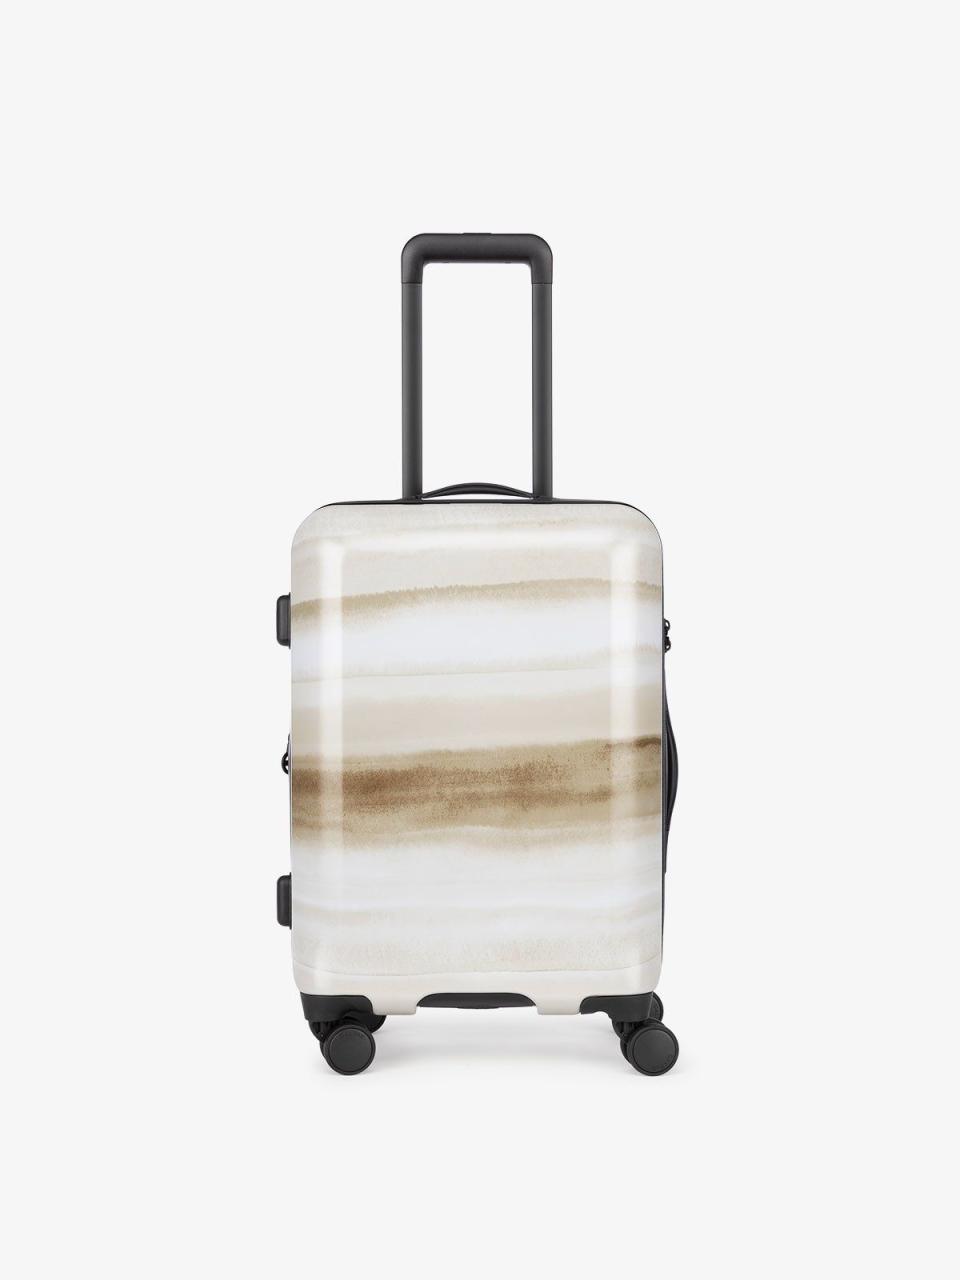 8) Sand Tide Carry-On Luggage